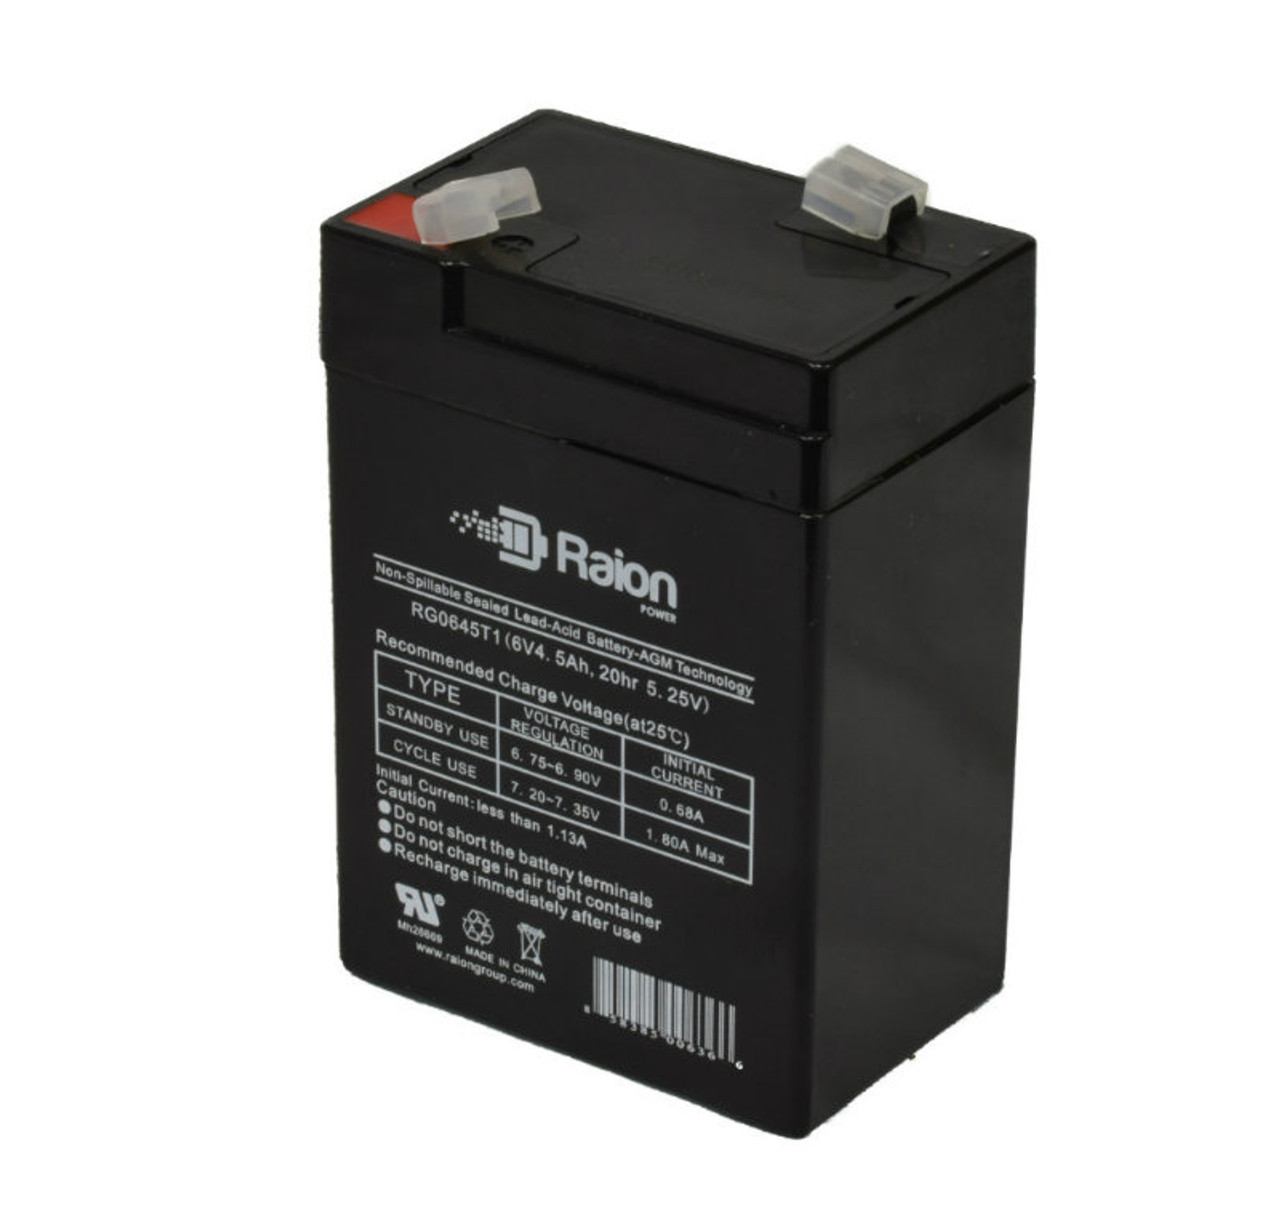 Raion Power RG0645T1 6V 4.5Ah Replacement Battery Cartridge for Union MXG-060450